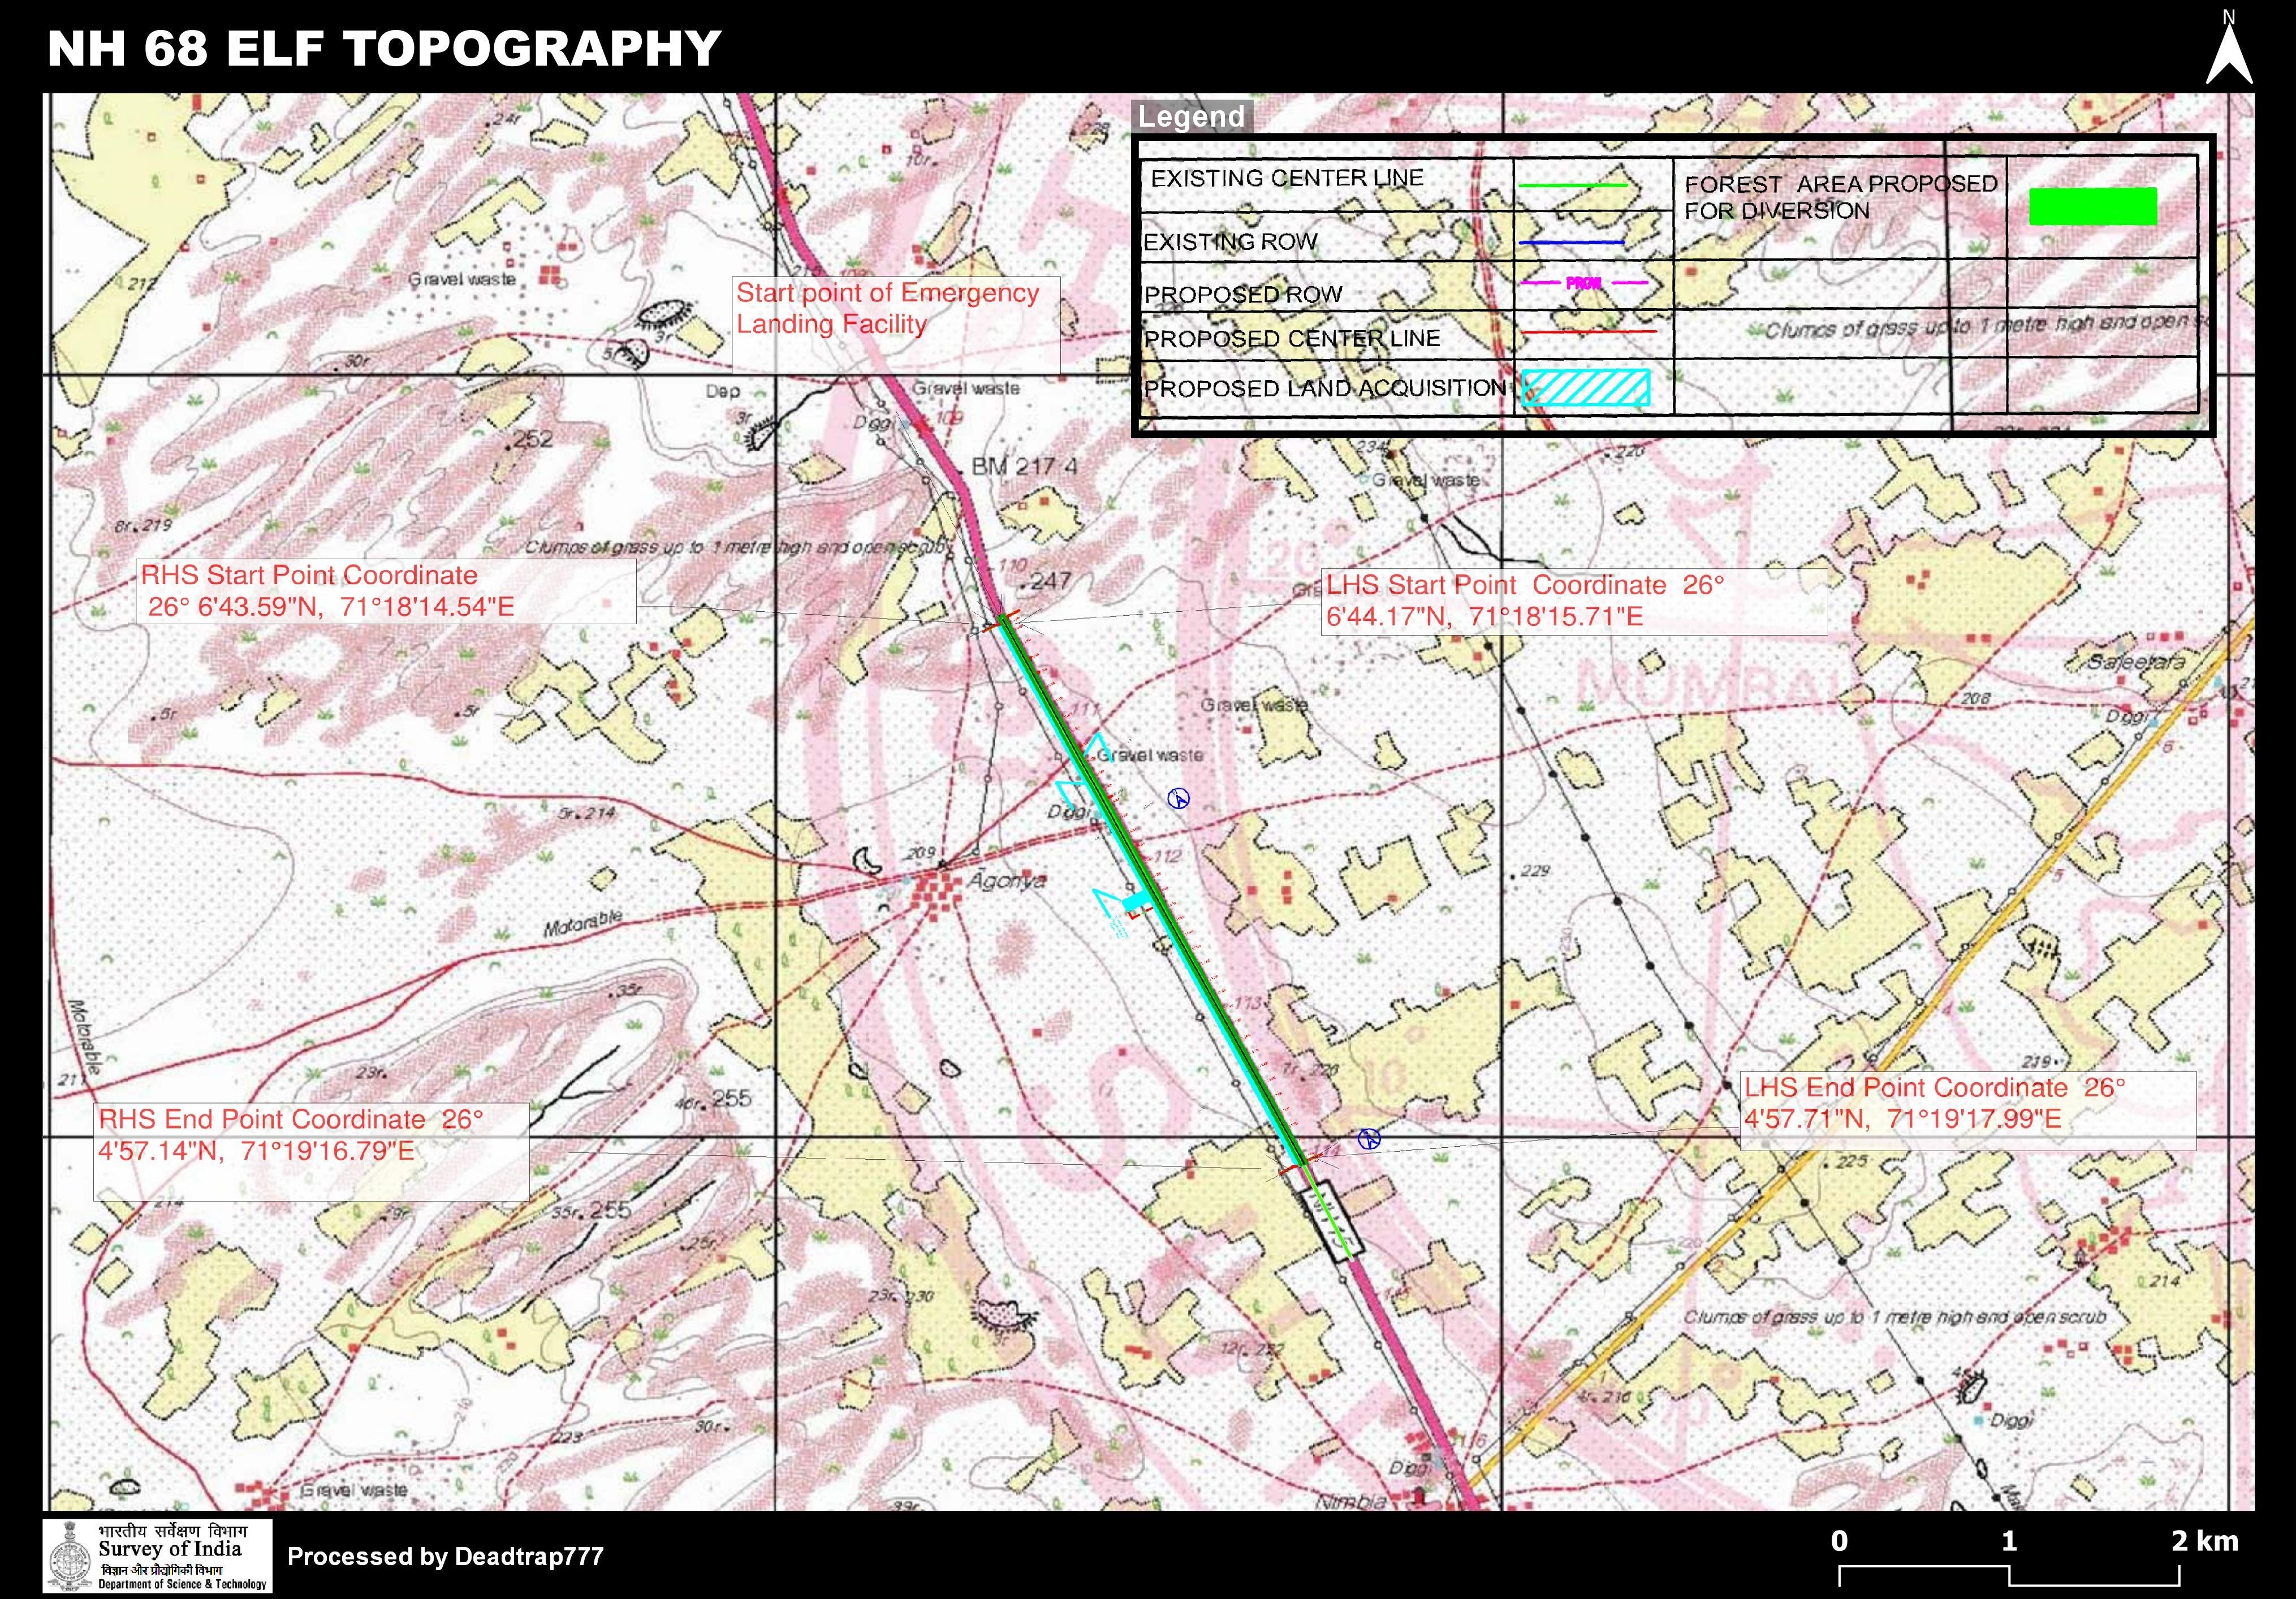 NH68 Barmer Topo SOI Map with Legend.jpg